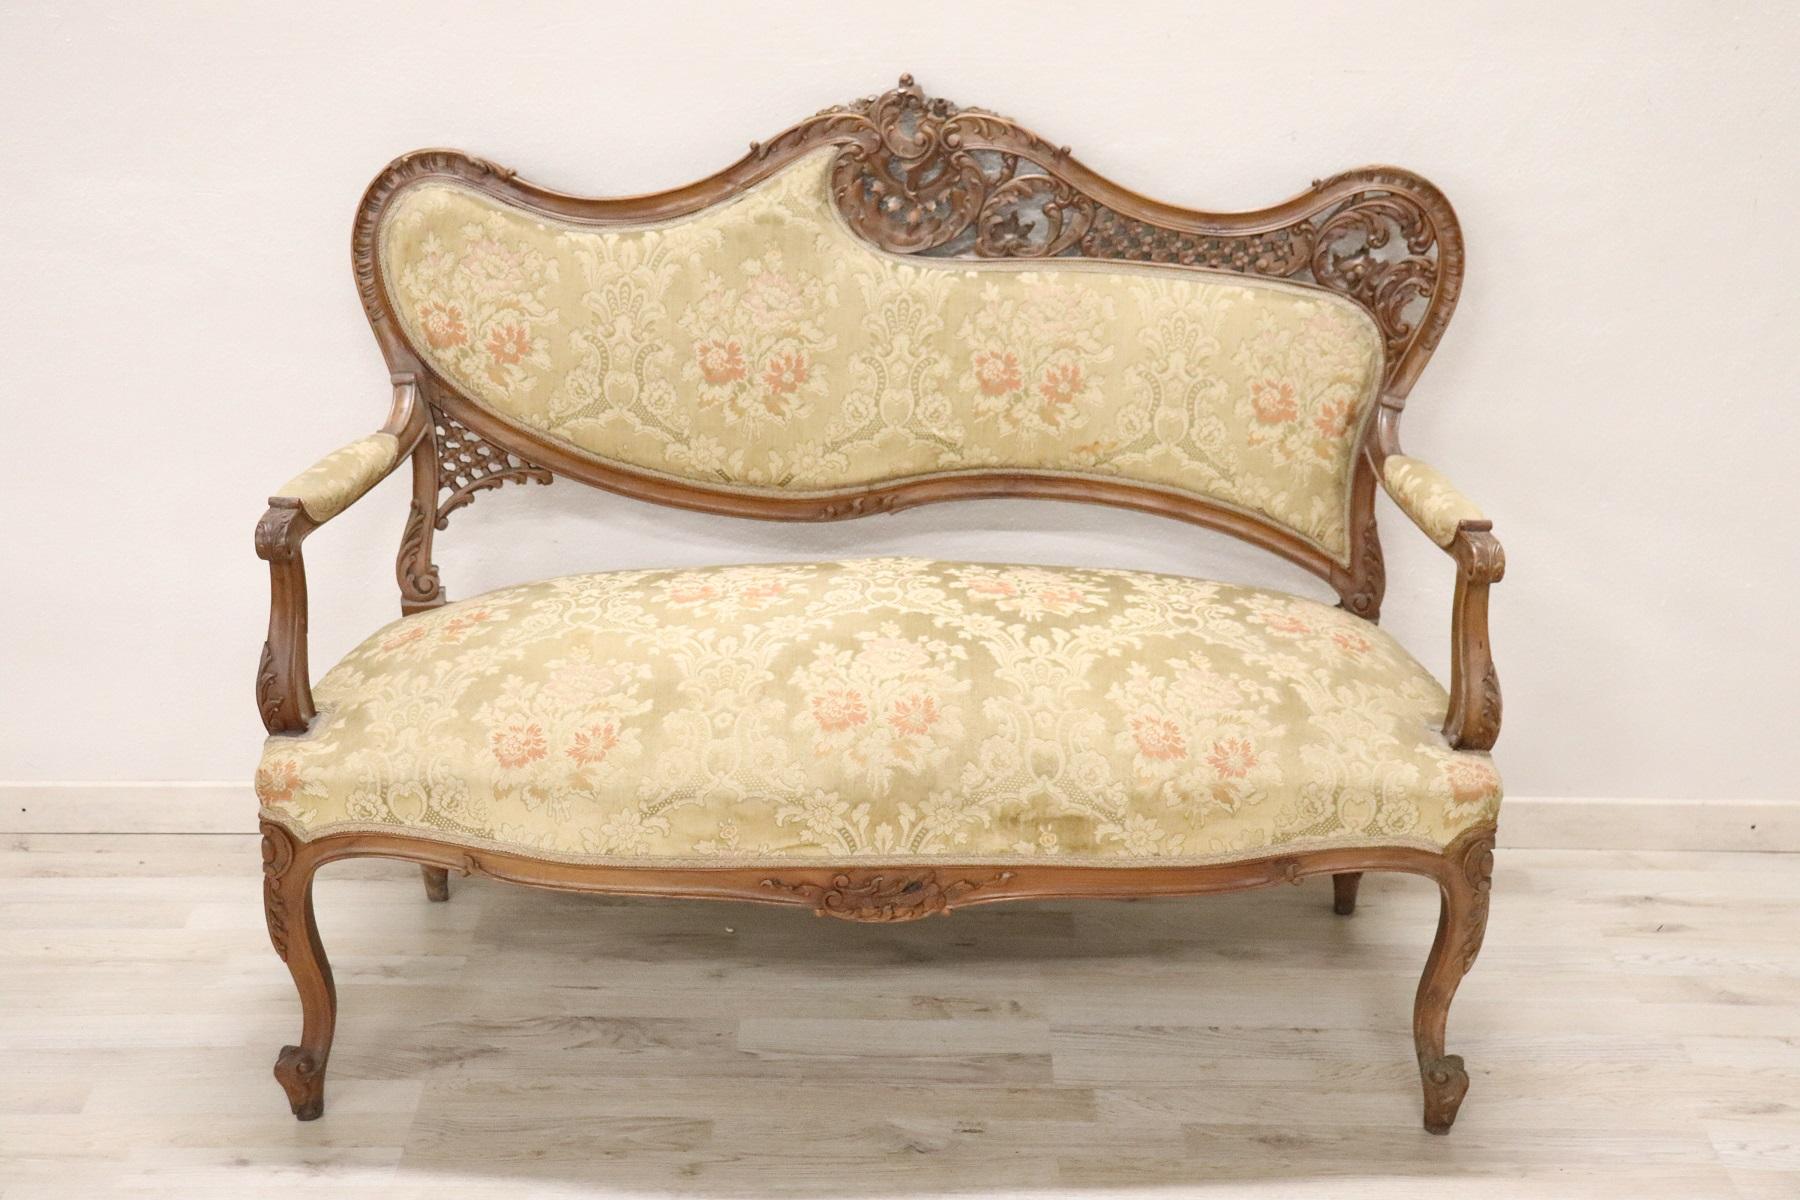 Rare complete French Art Nouveau period end of the 19th century.
This living room includes:
1 sofa
4 chairs
2 armchairs
1 rare corner armchair
Made of solid walnut with amazing and particular wood carving work. This work is certainly the work